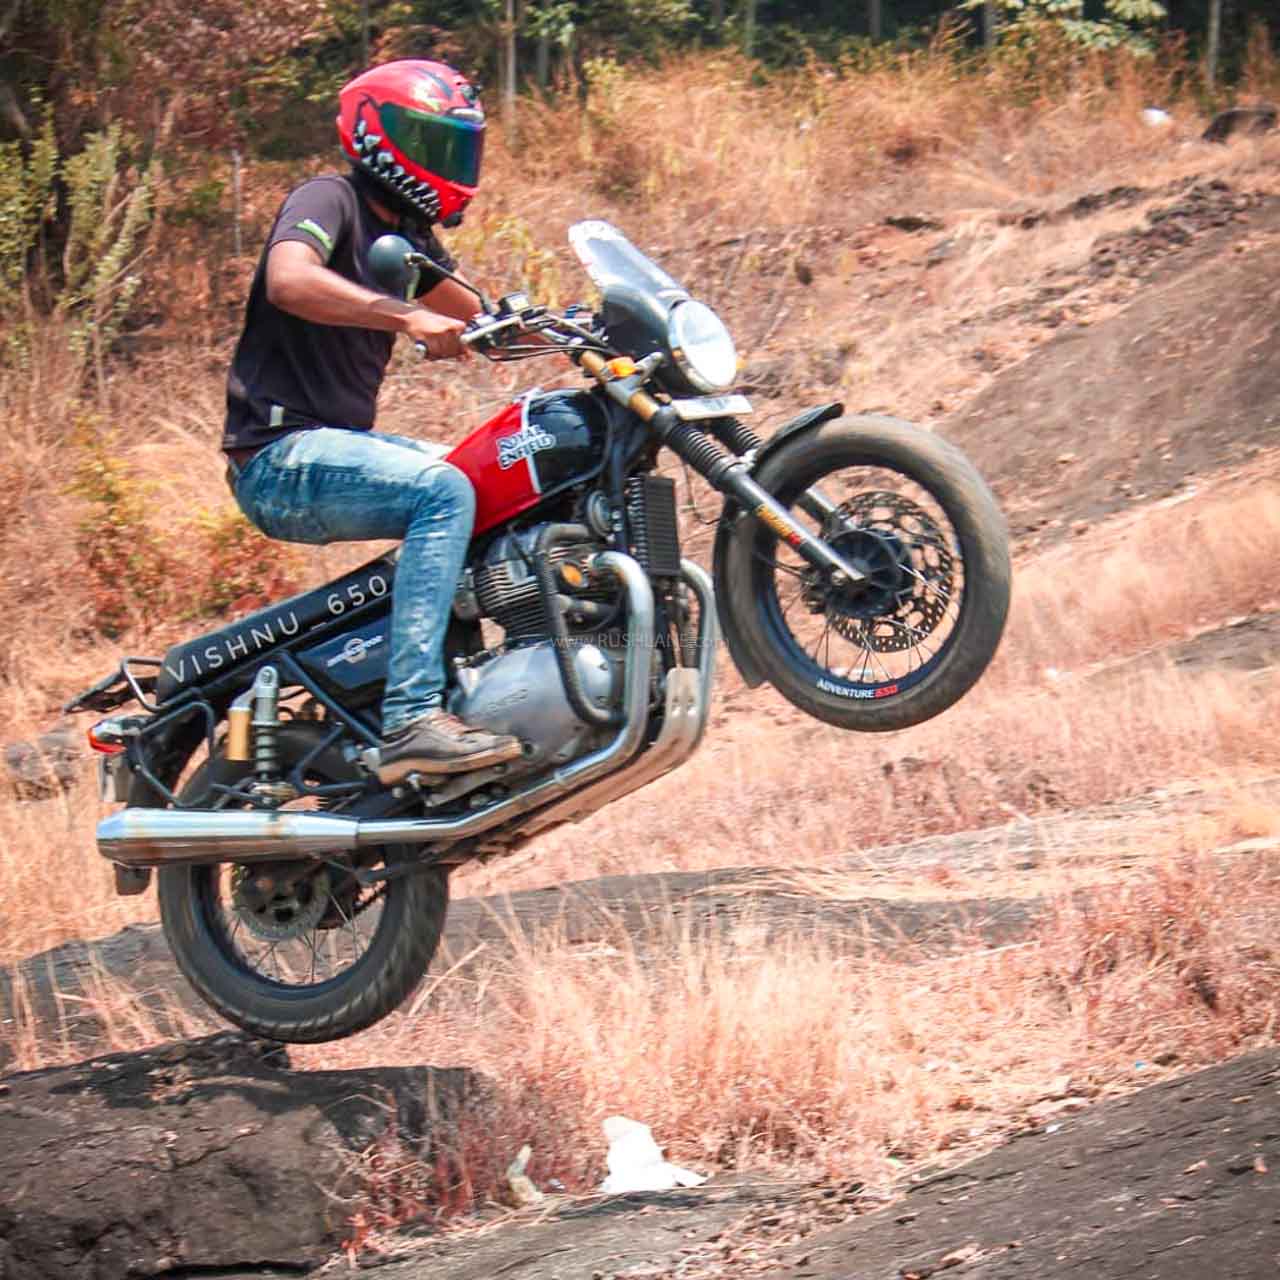 Royal Enfield Interceptor 650 withstands abuse - Owner shares stunt video